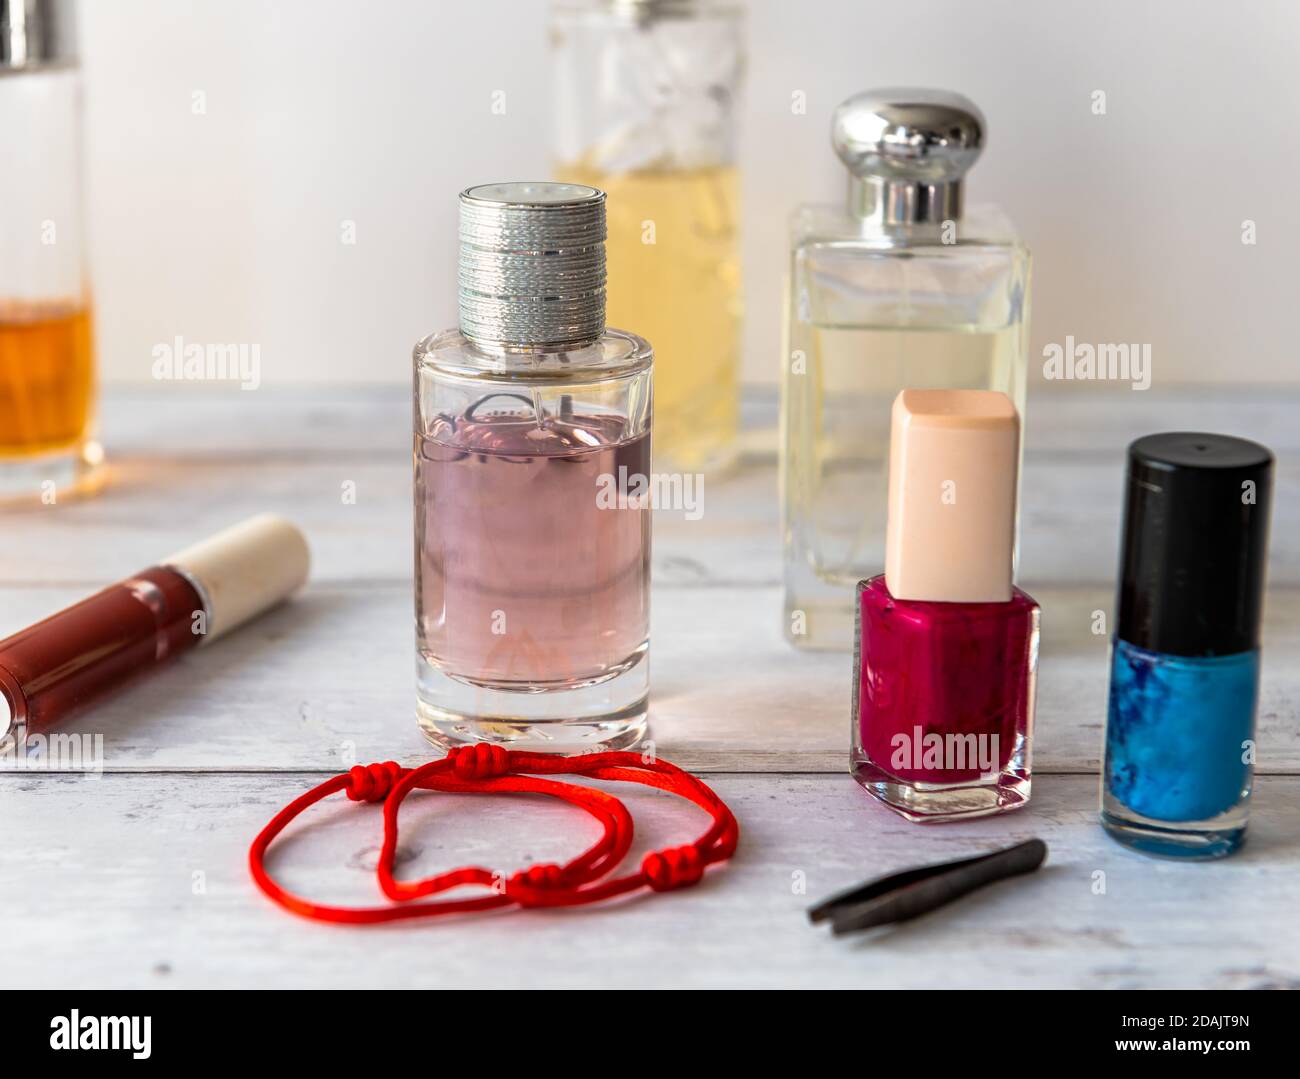 Different types and shapes of bottles of perfumes Stock Photo